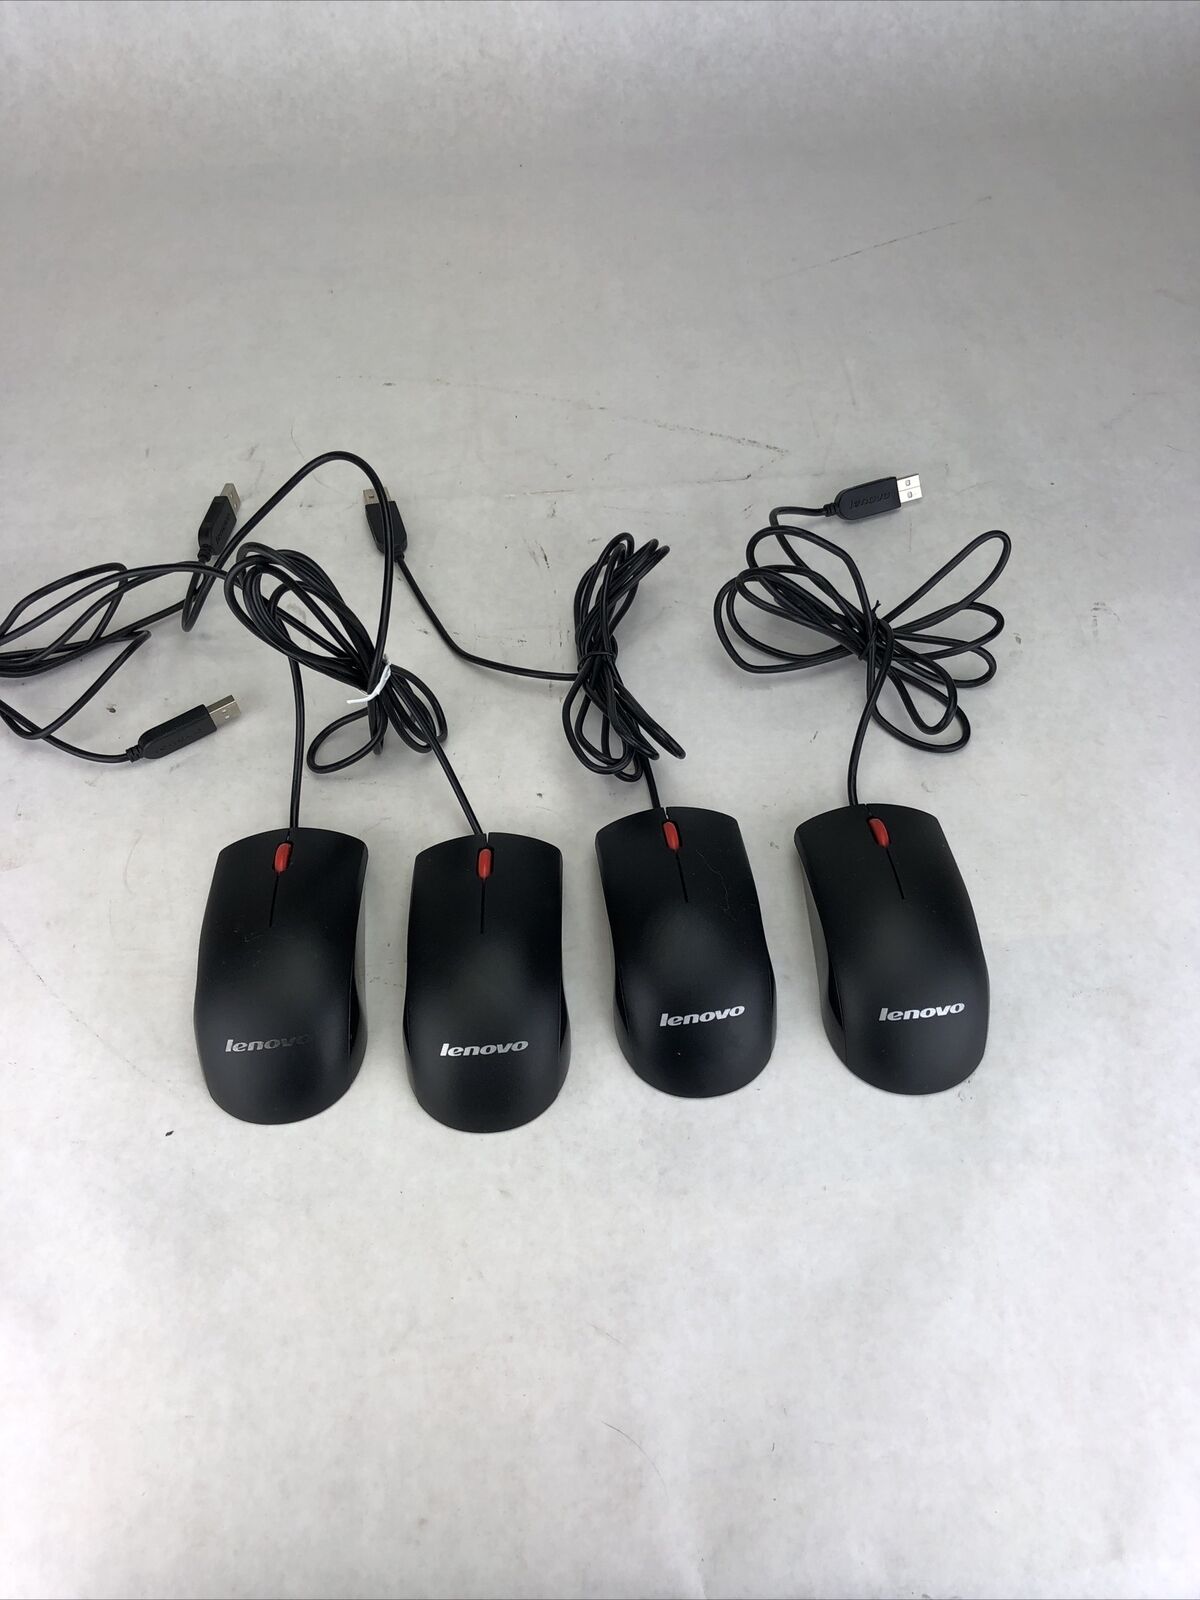 Lot of 4 Lenovo Model: MOEUUQA Black Wired USB Mouse